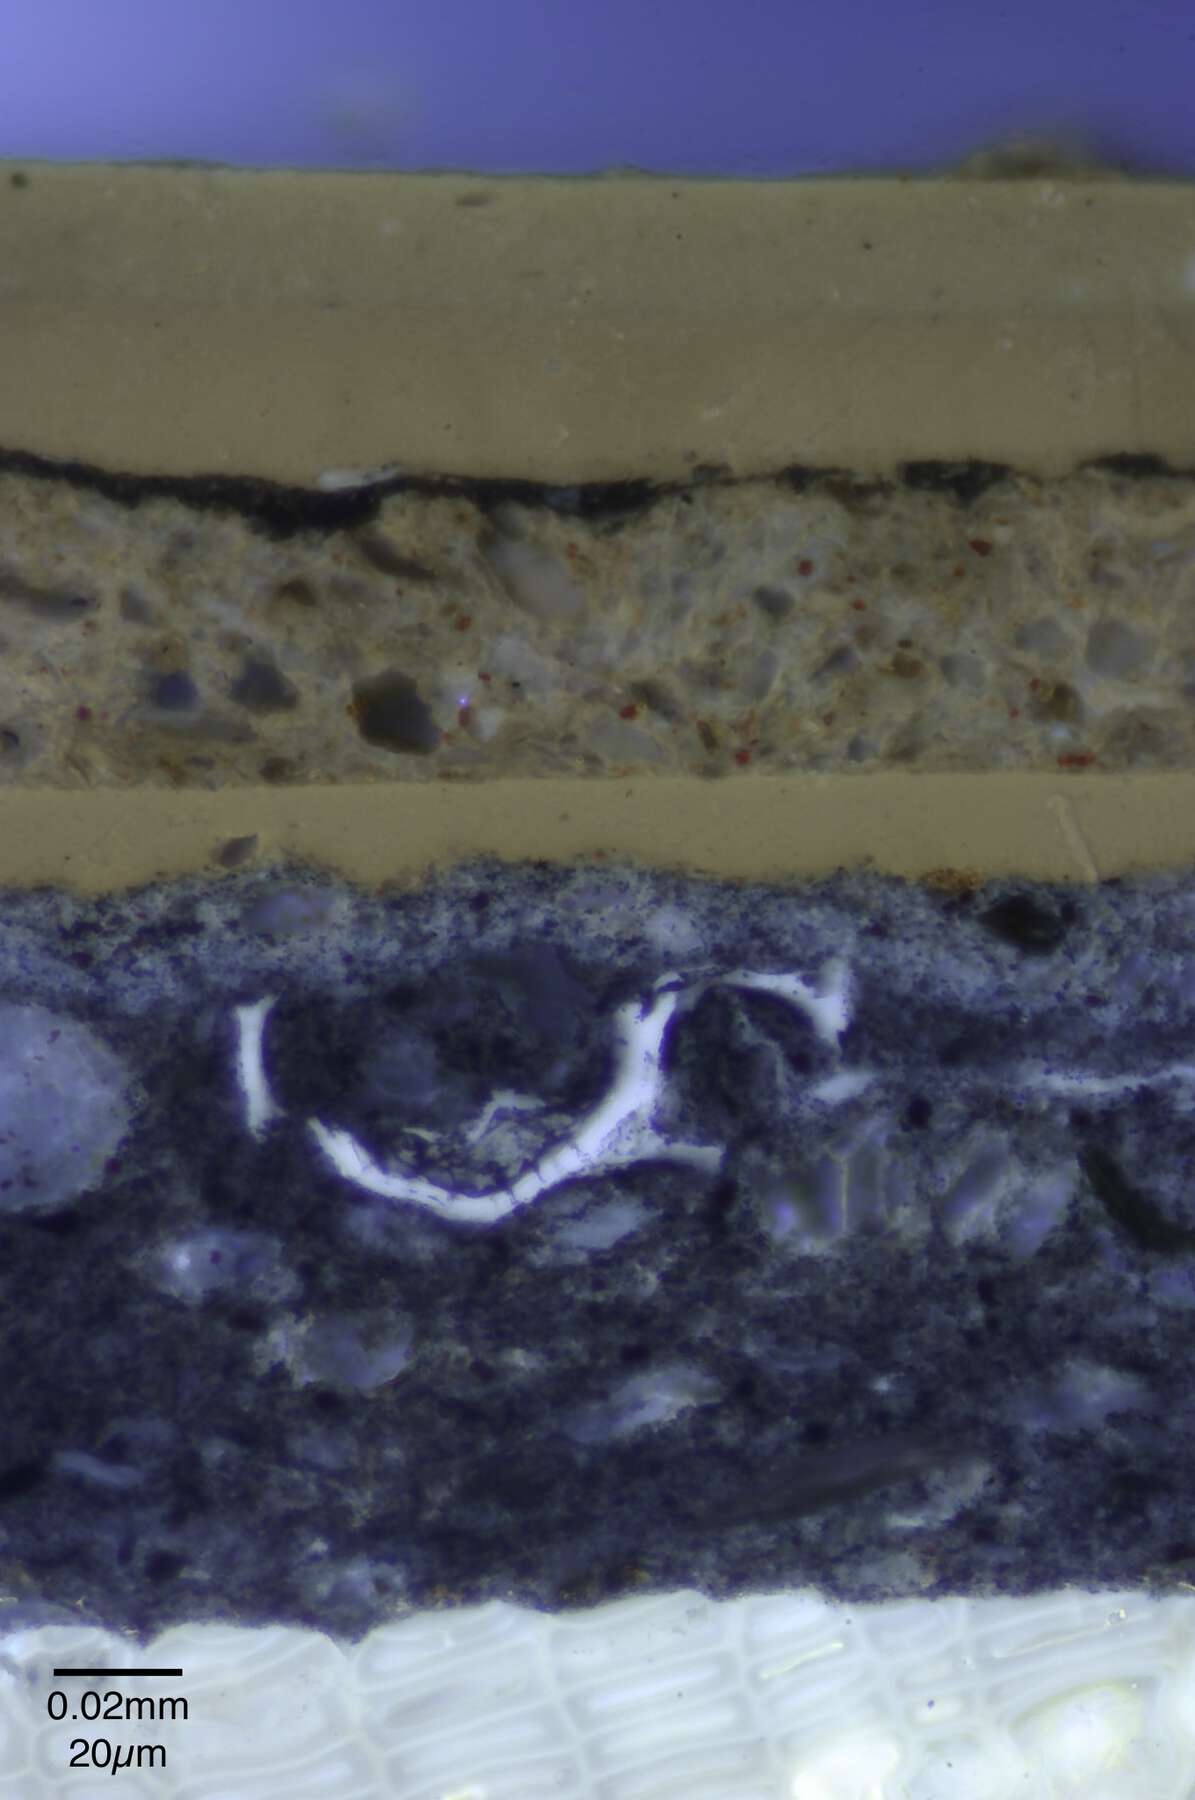 photomicrograph of the ground used in one of the cabinets, shown as striations in various shades of beige, brown, blue, and white